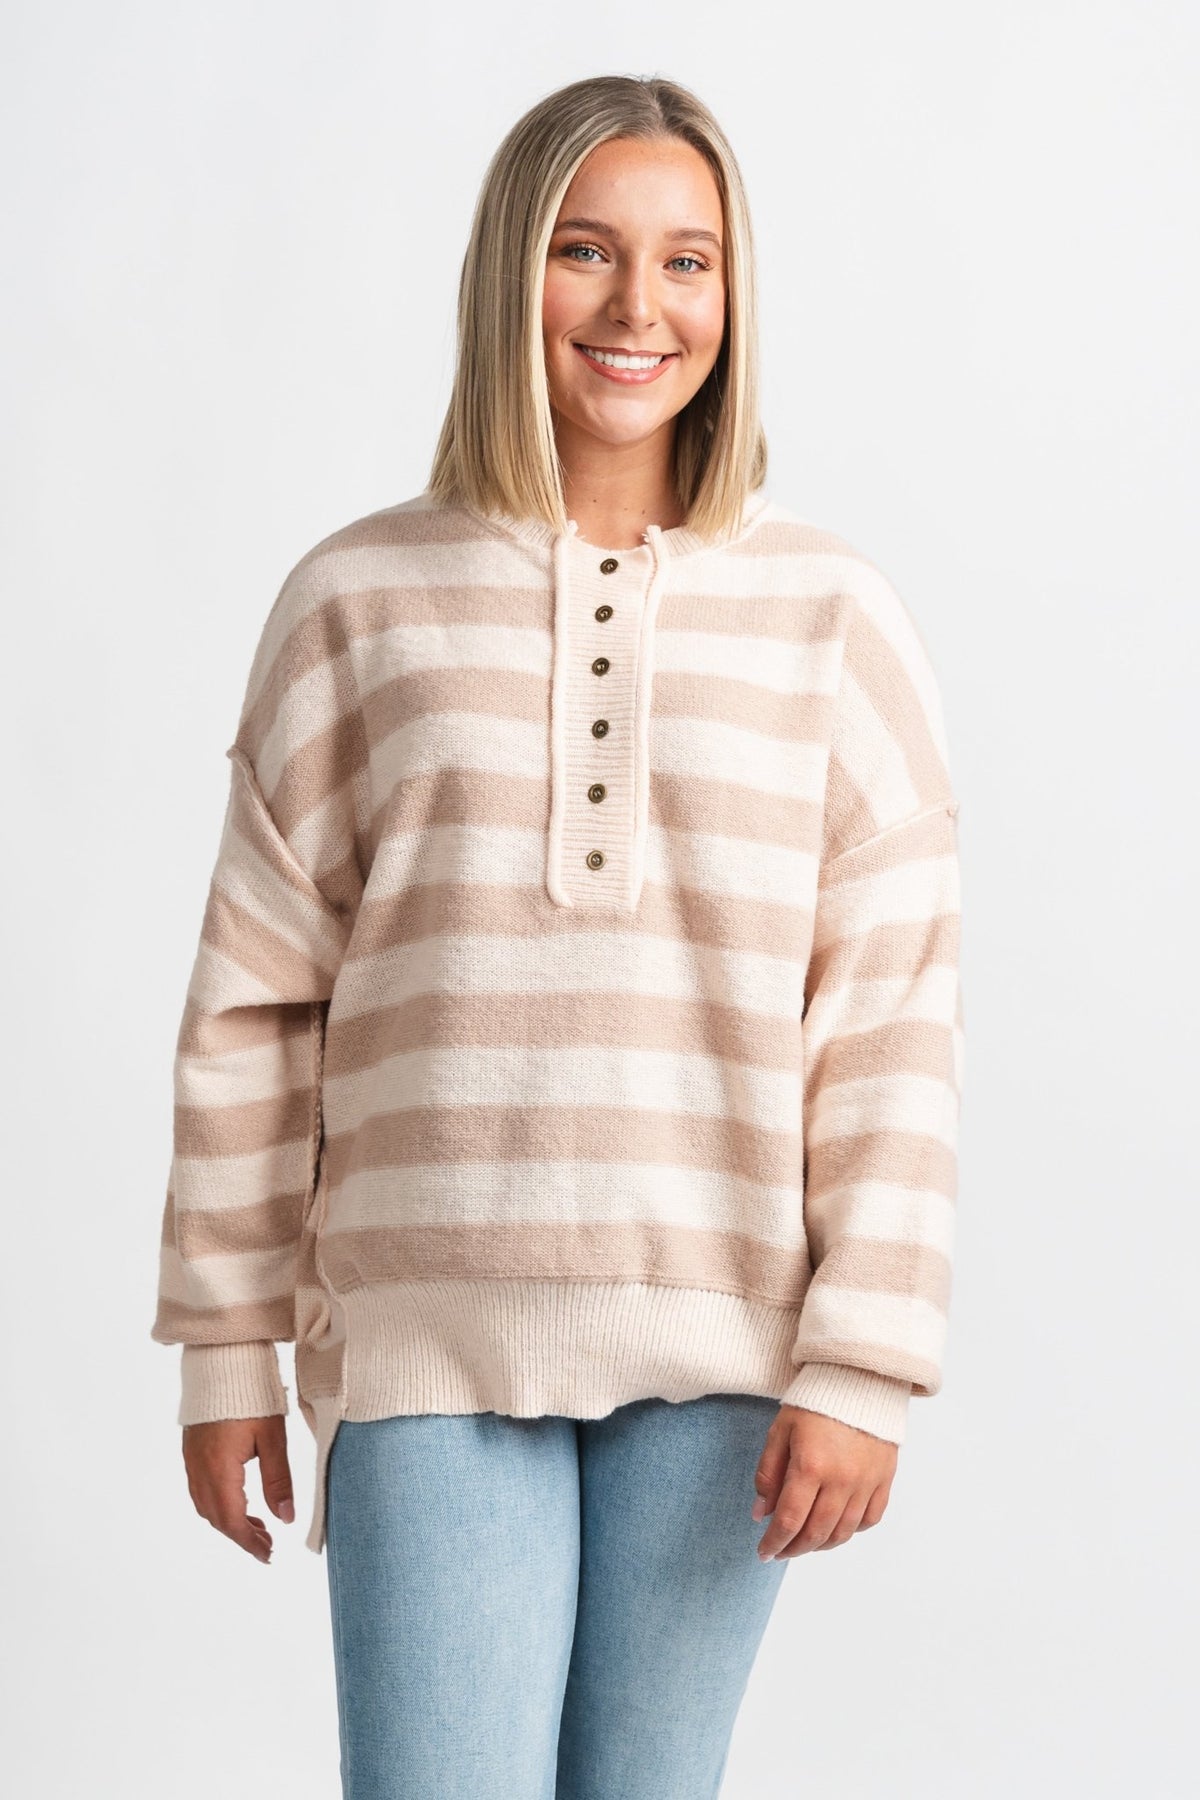 Oversized striped sweater natural/taupe – Boutique Sweaters | Fashionable Sweaters at Lush Fashion Lounge Boutique in Oklahoma City